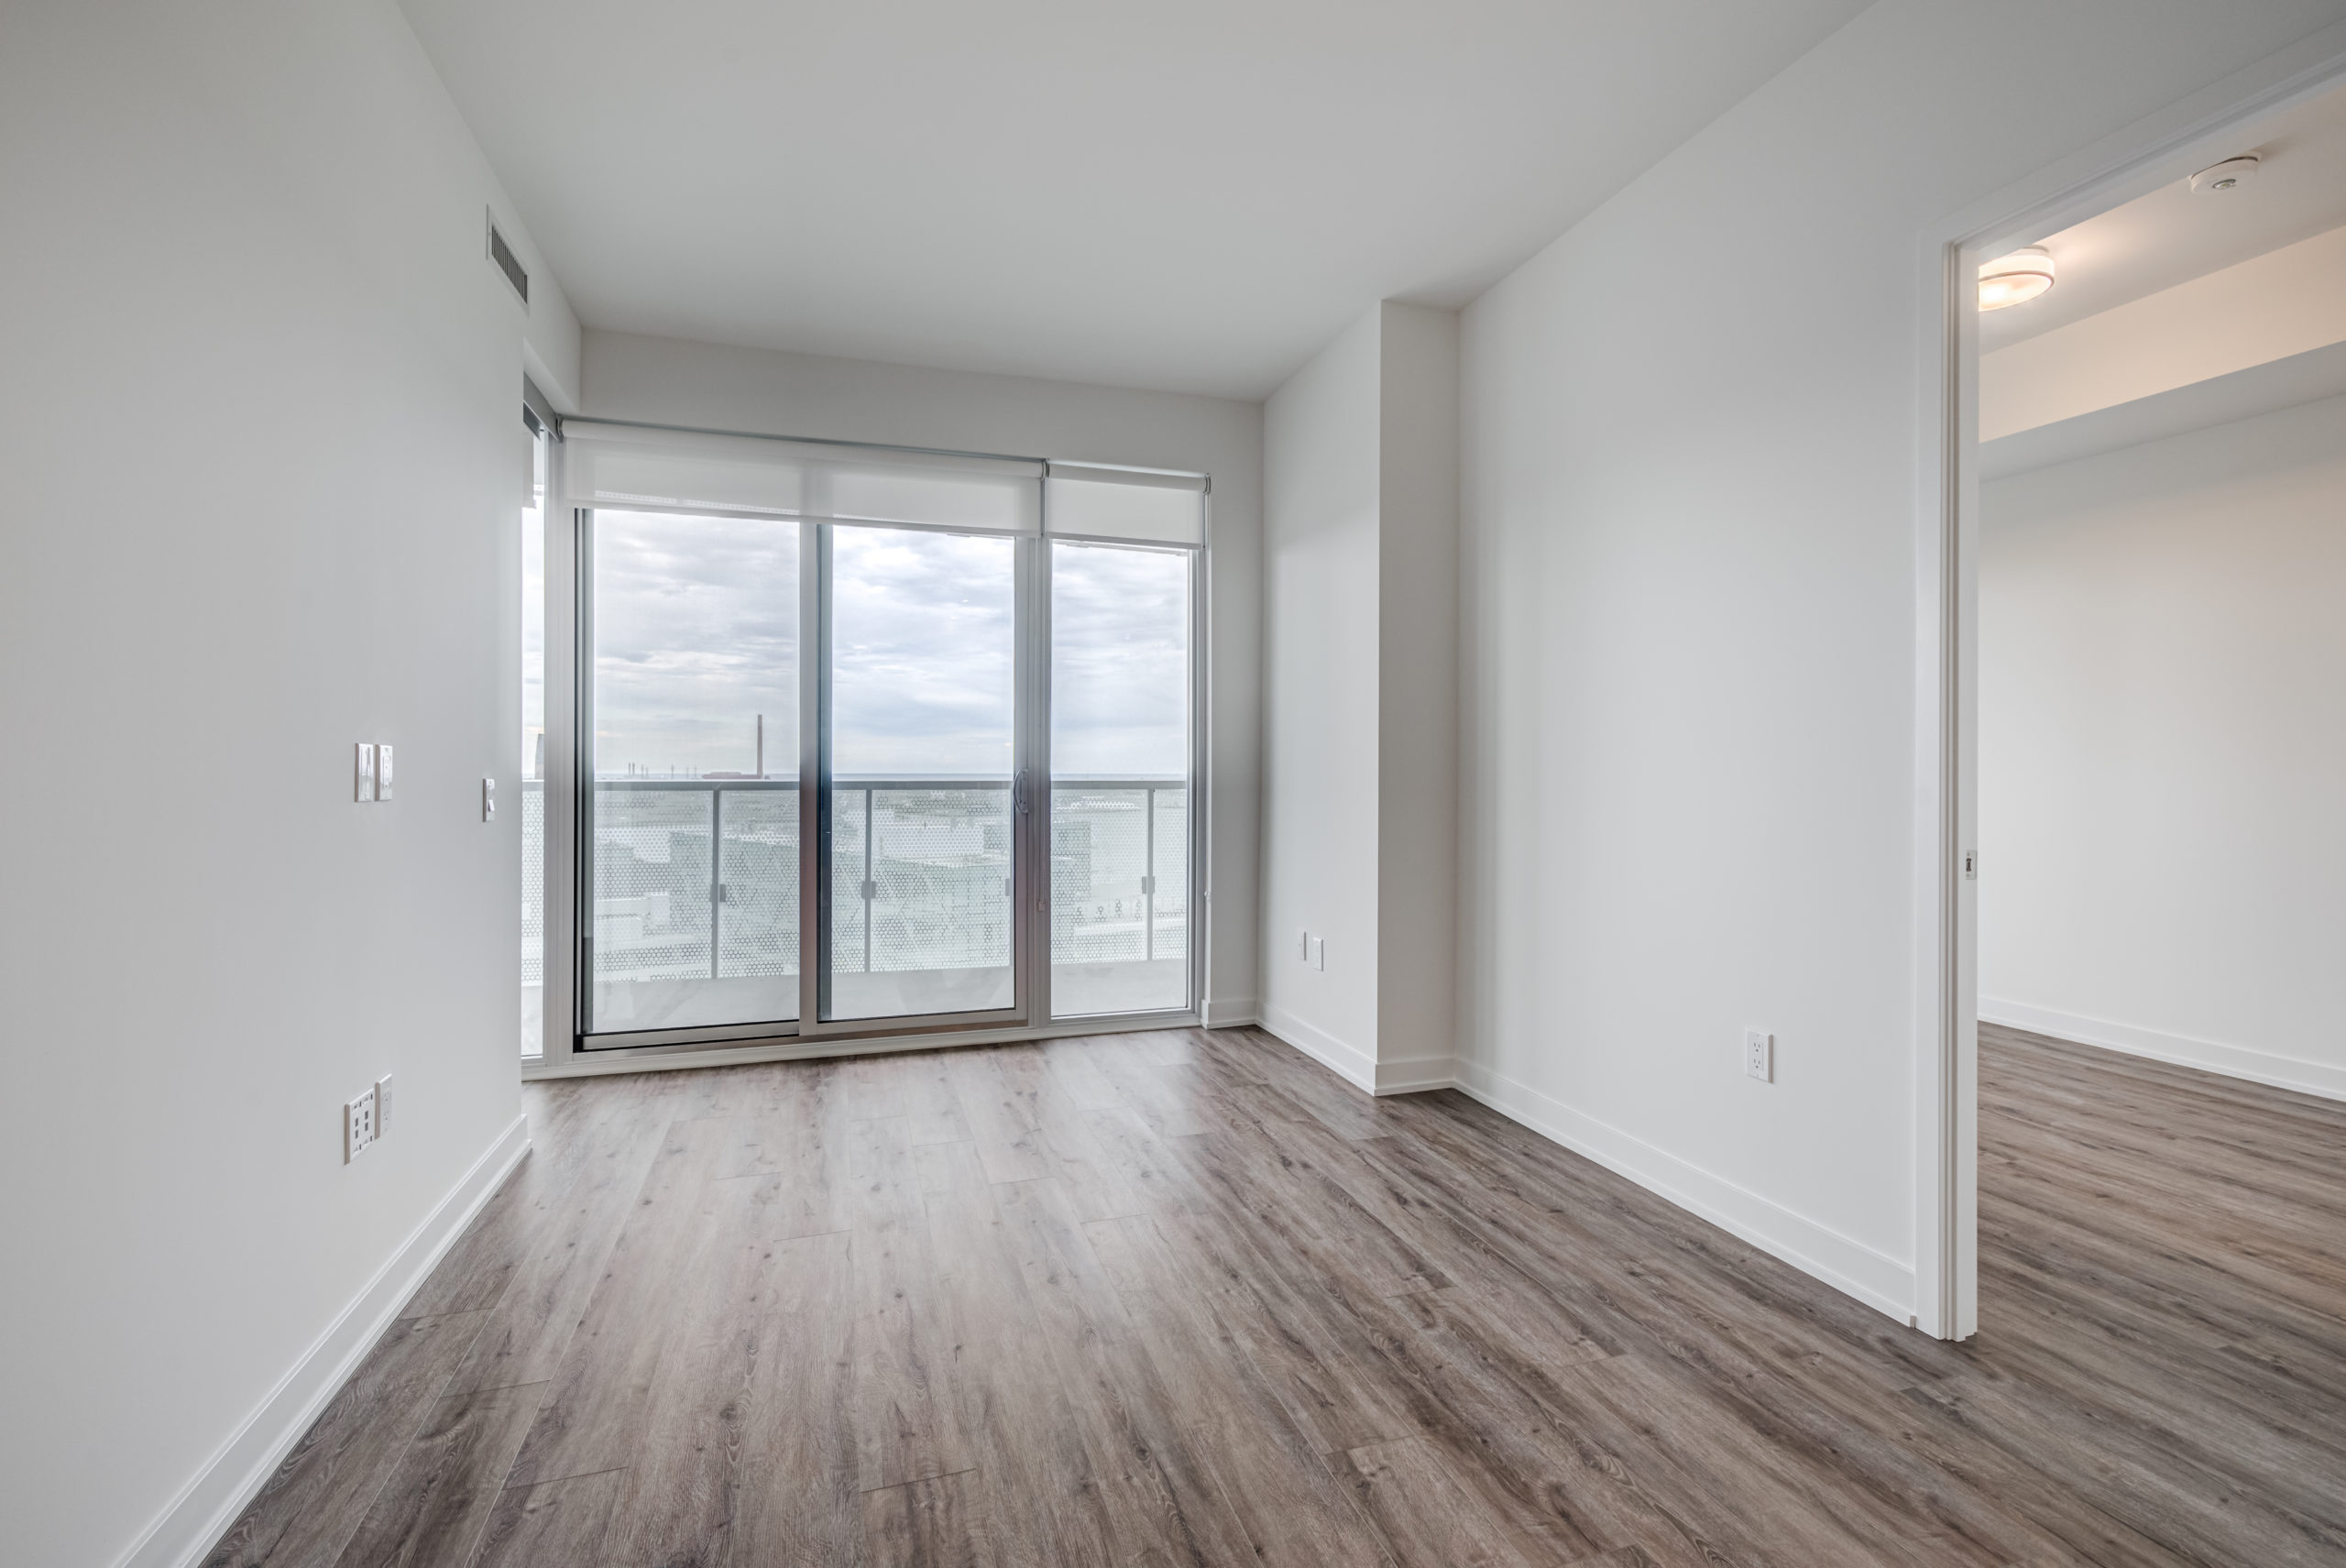 Brightly lit condo living room and walkout balcony.